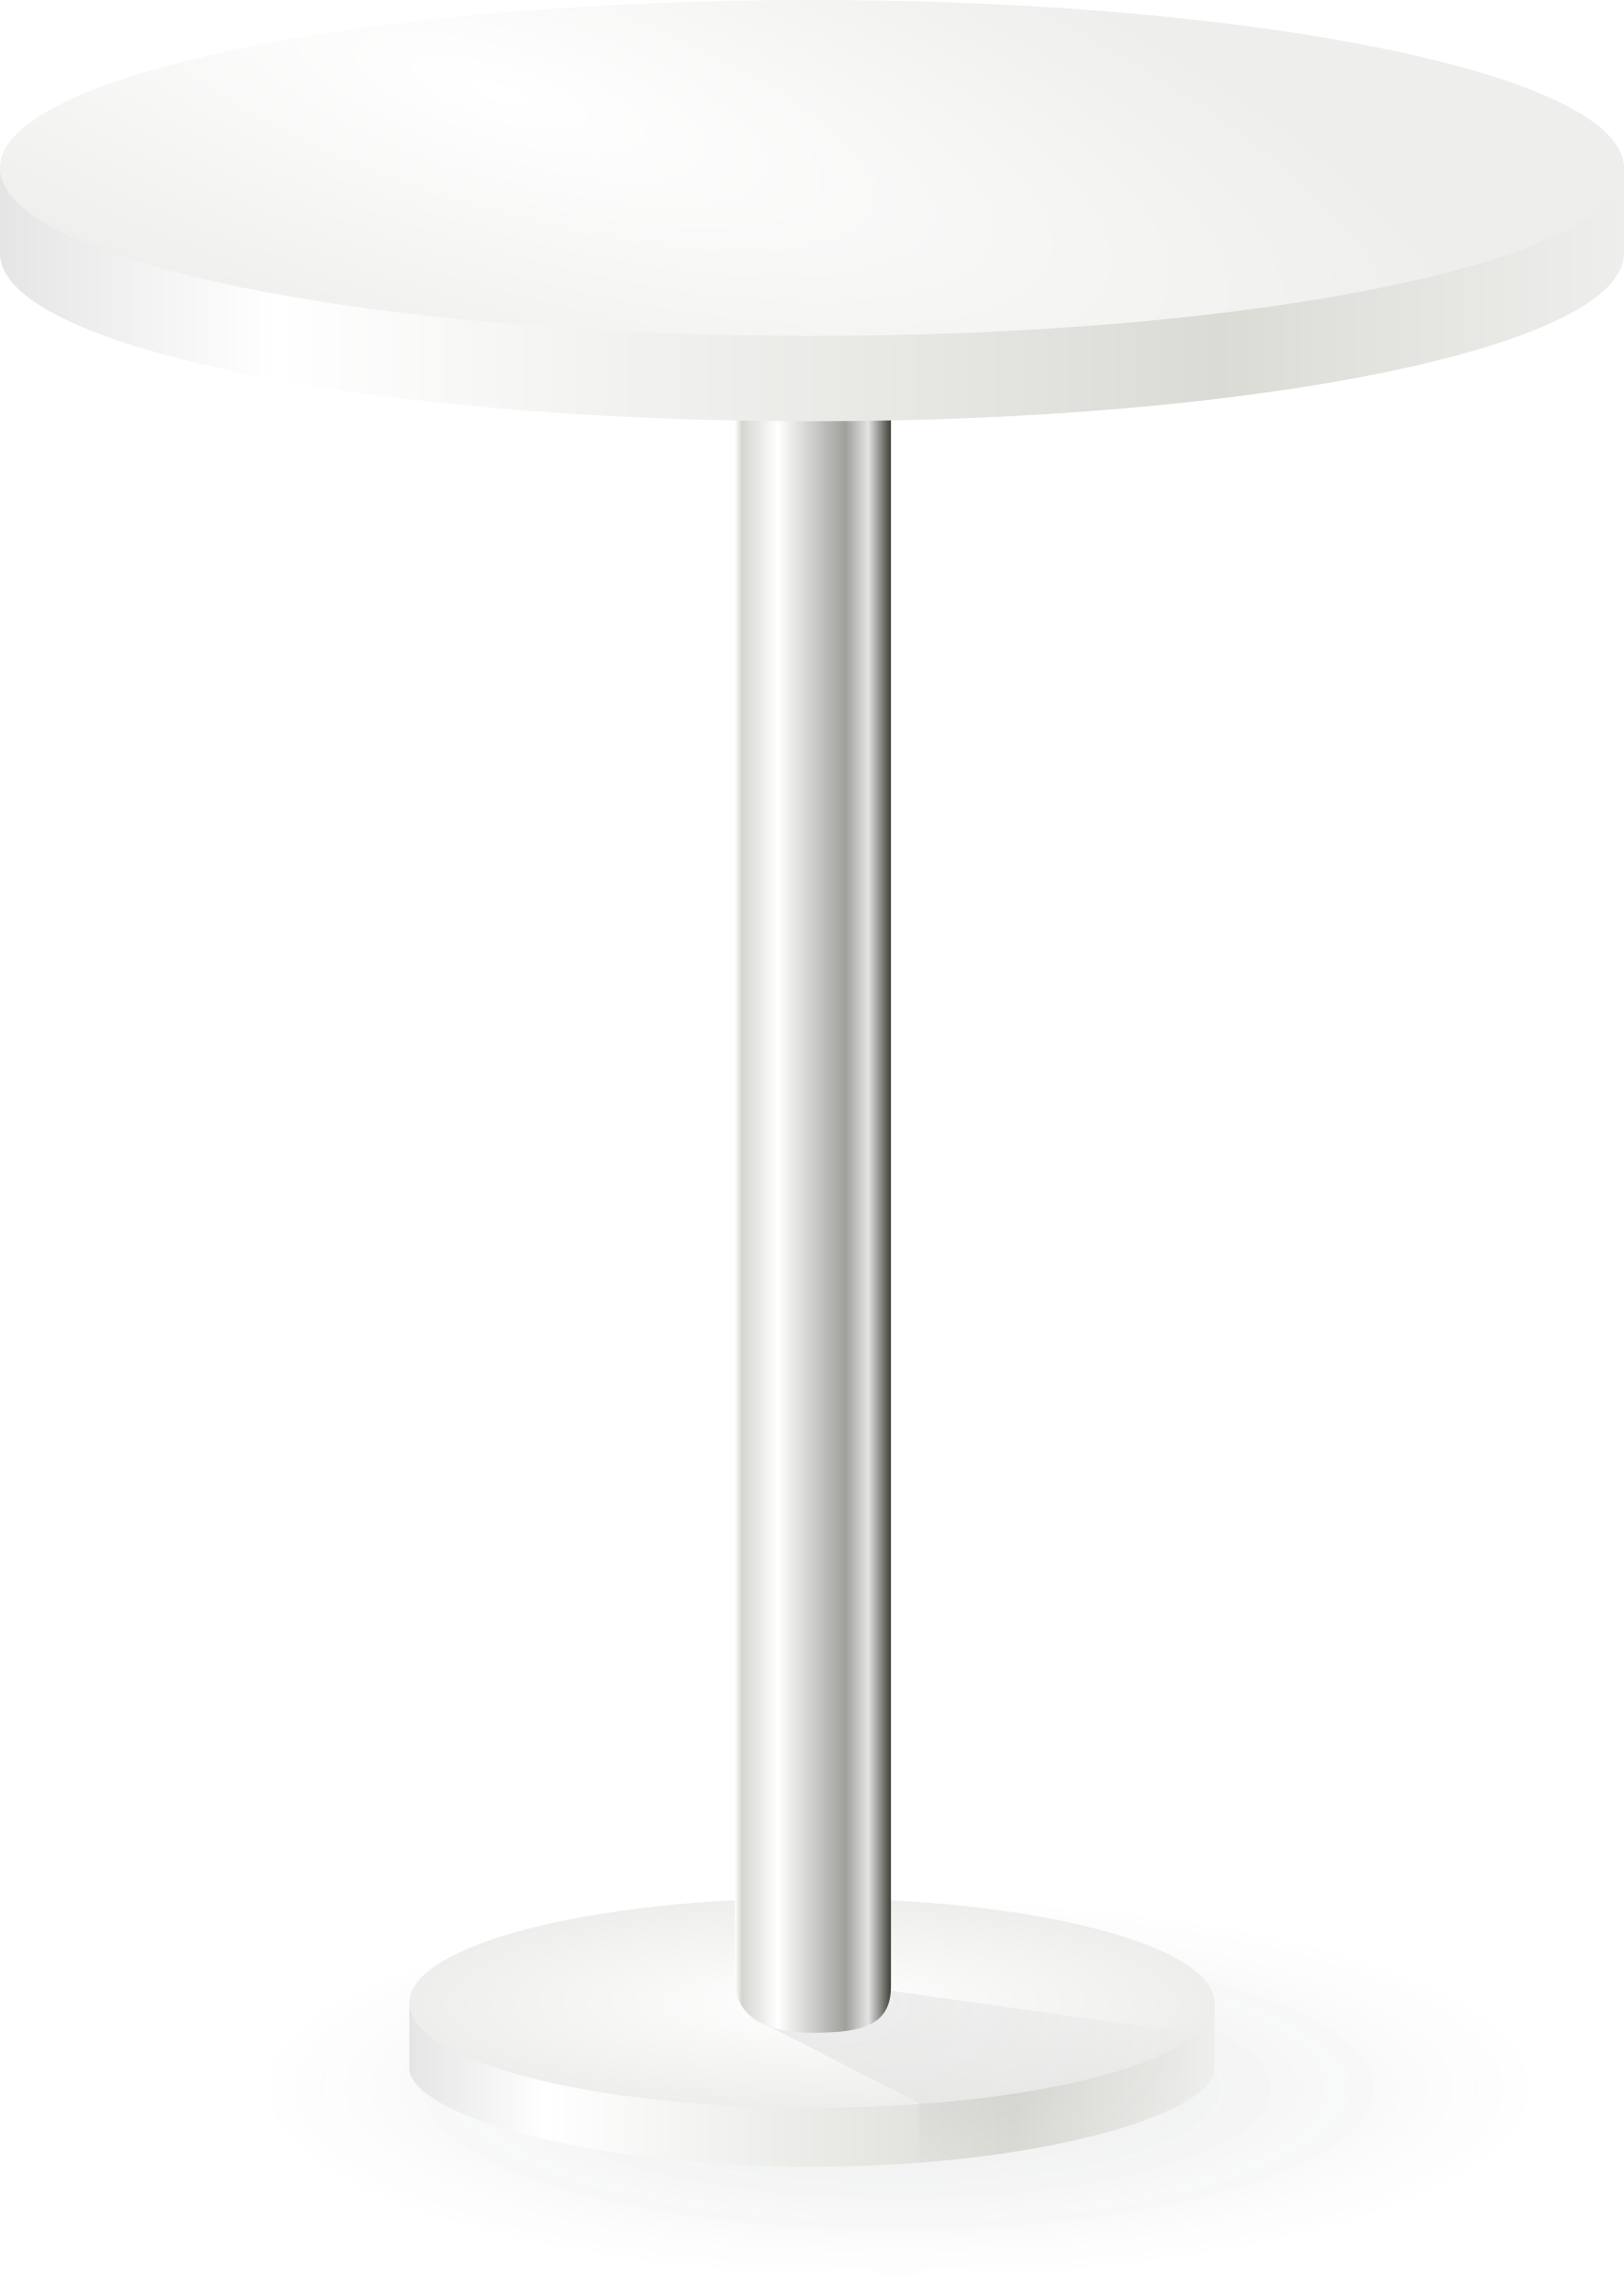 Big Image - White Table Png Hd (1710x2400)